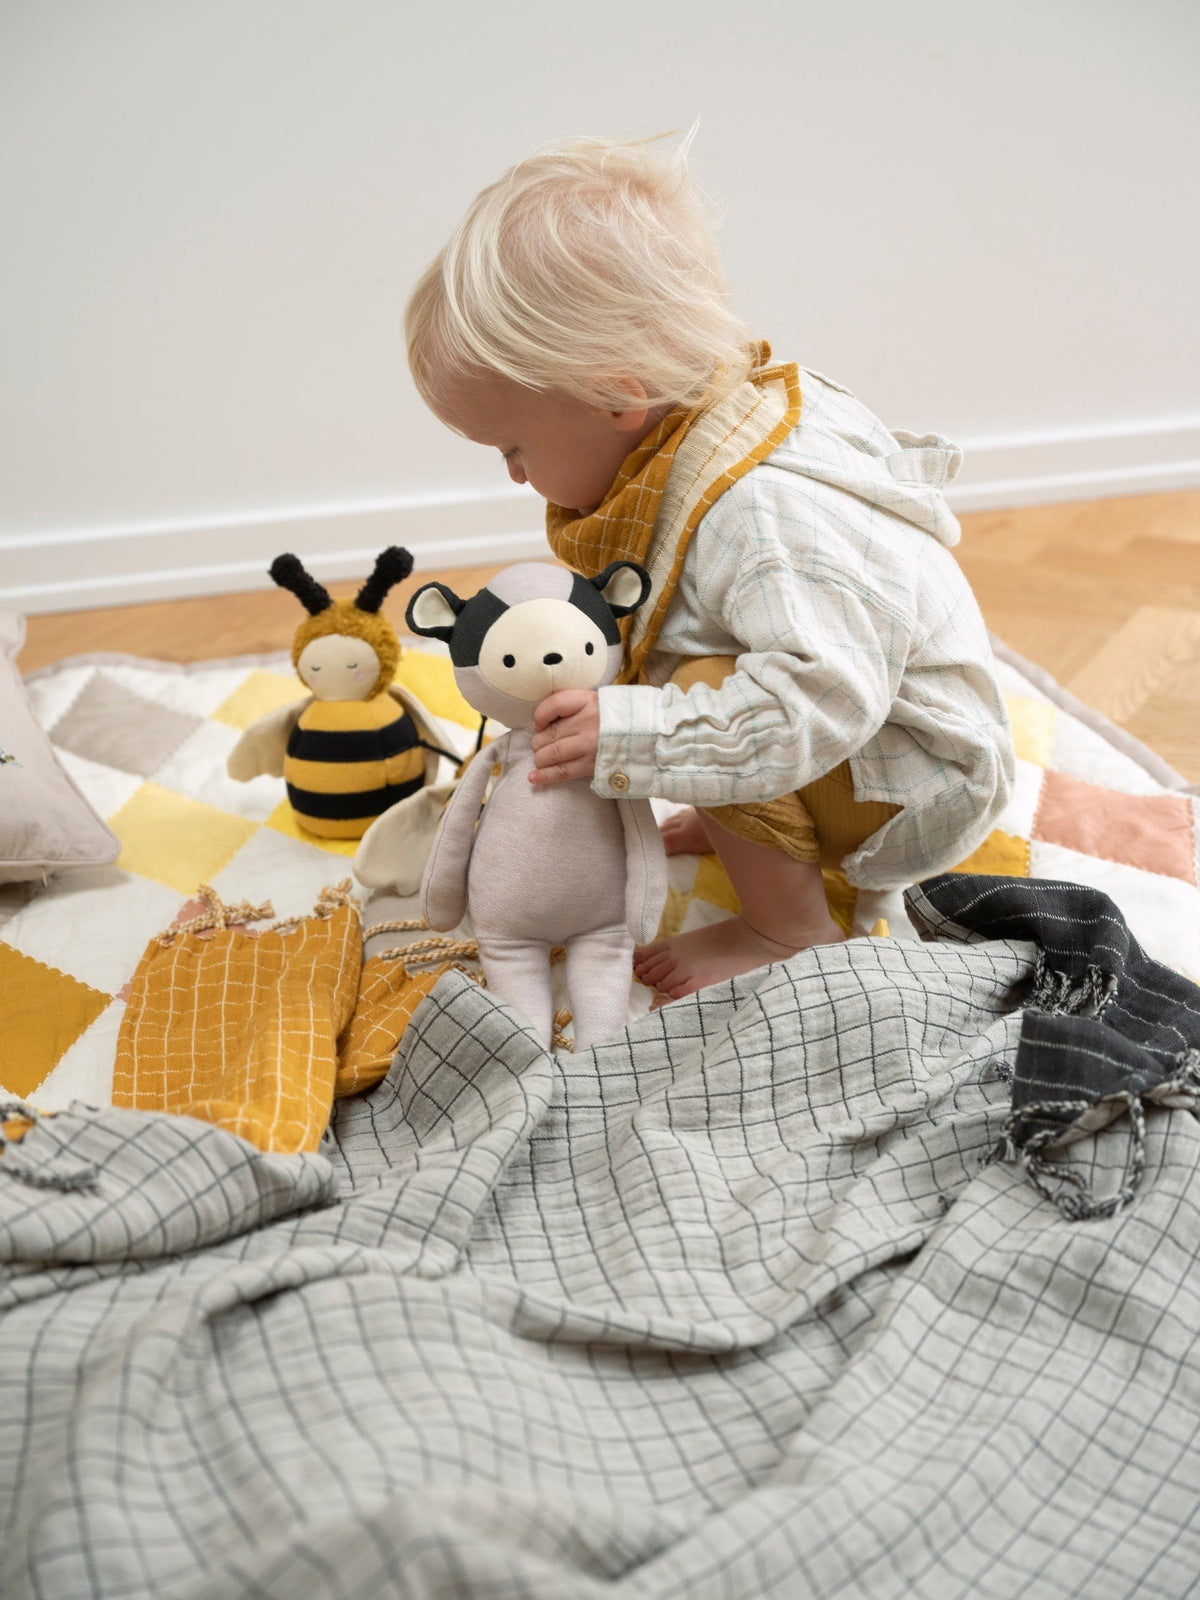 The Fabelab Bee Tumbler will provide hours of fun for your little one as well as looking lovely on a nursery shelf.